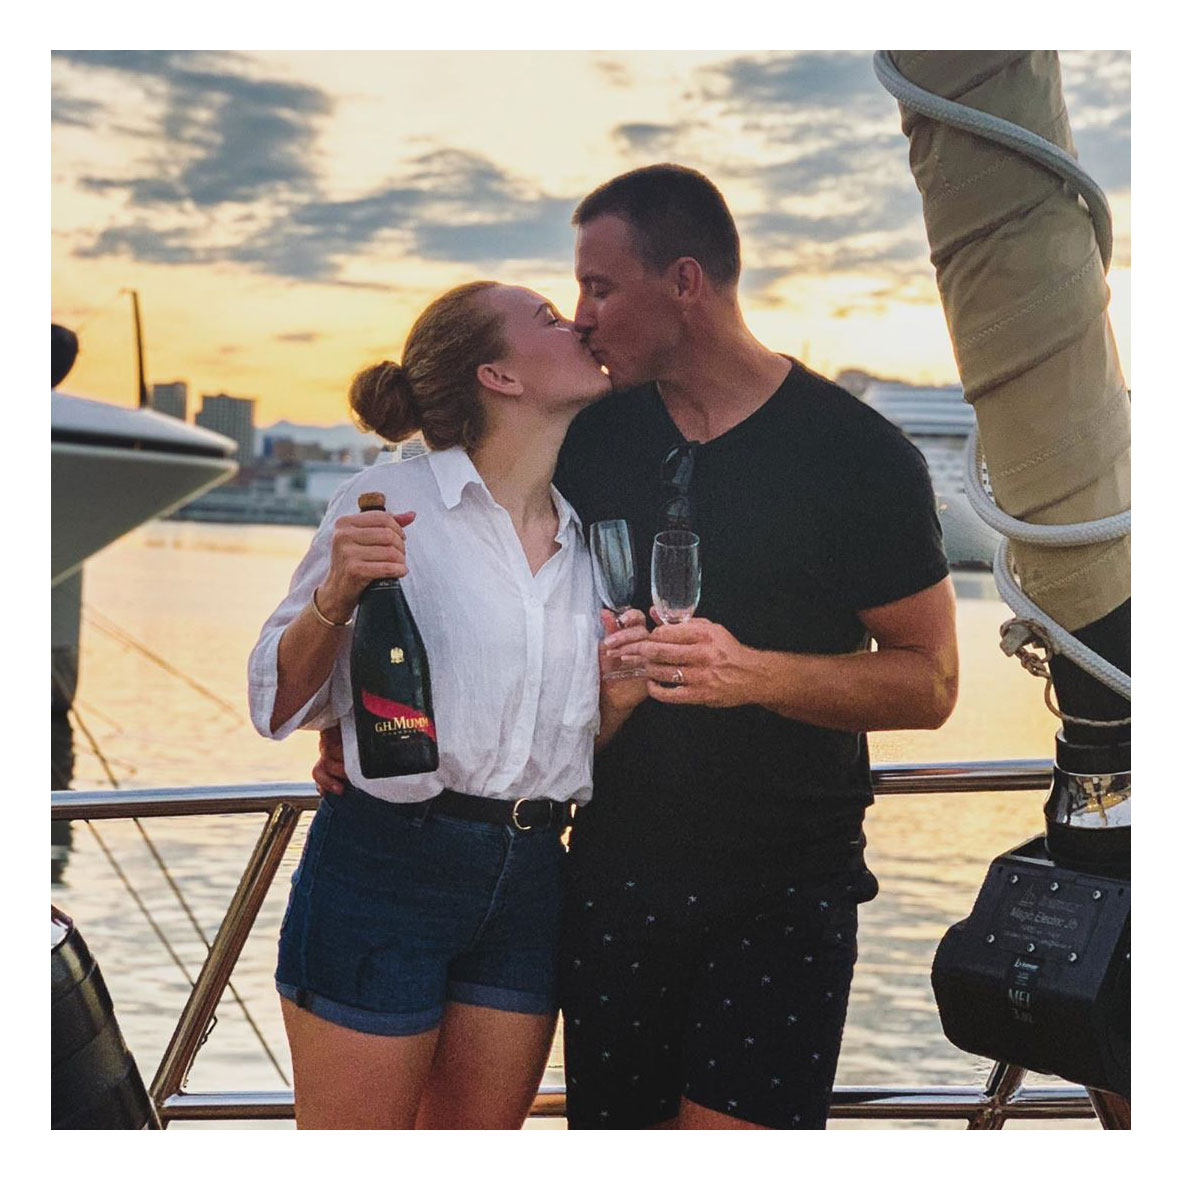 Paget Berry and Ciara Duggan Engagement Instagram